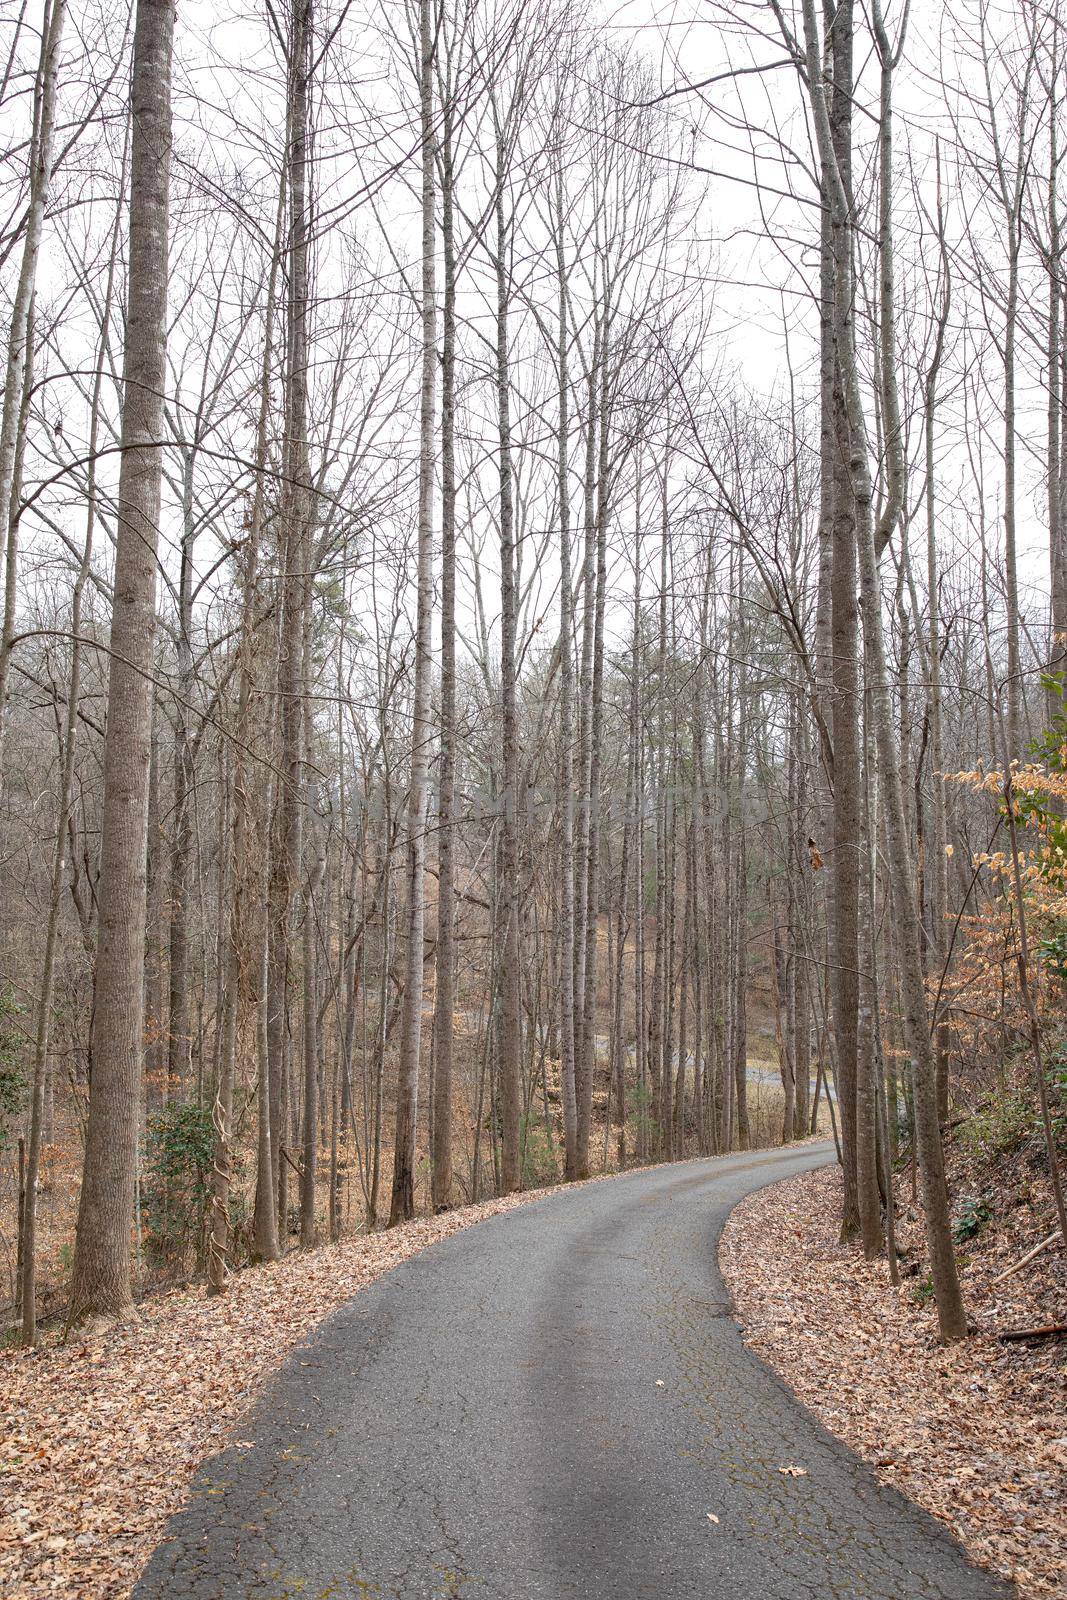 Winding, hilly asphalt road leads down through bare trees in winter.